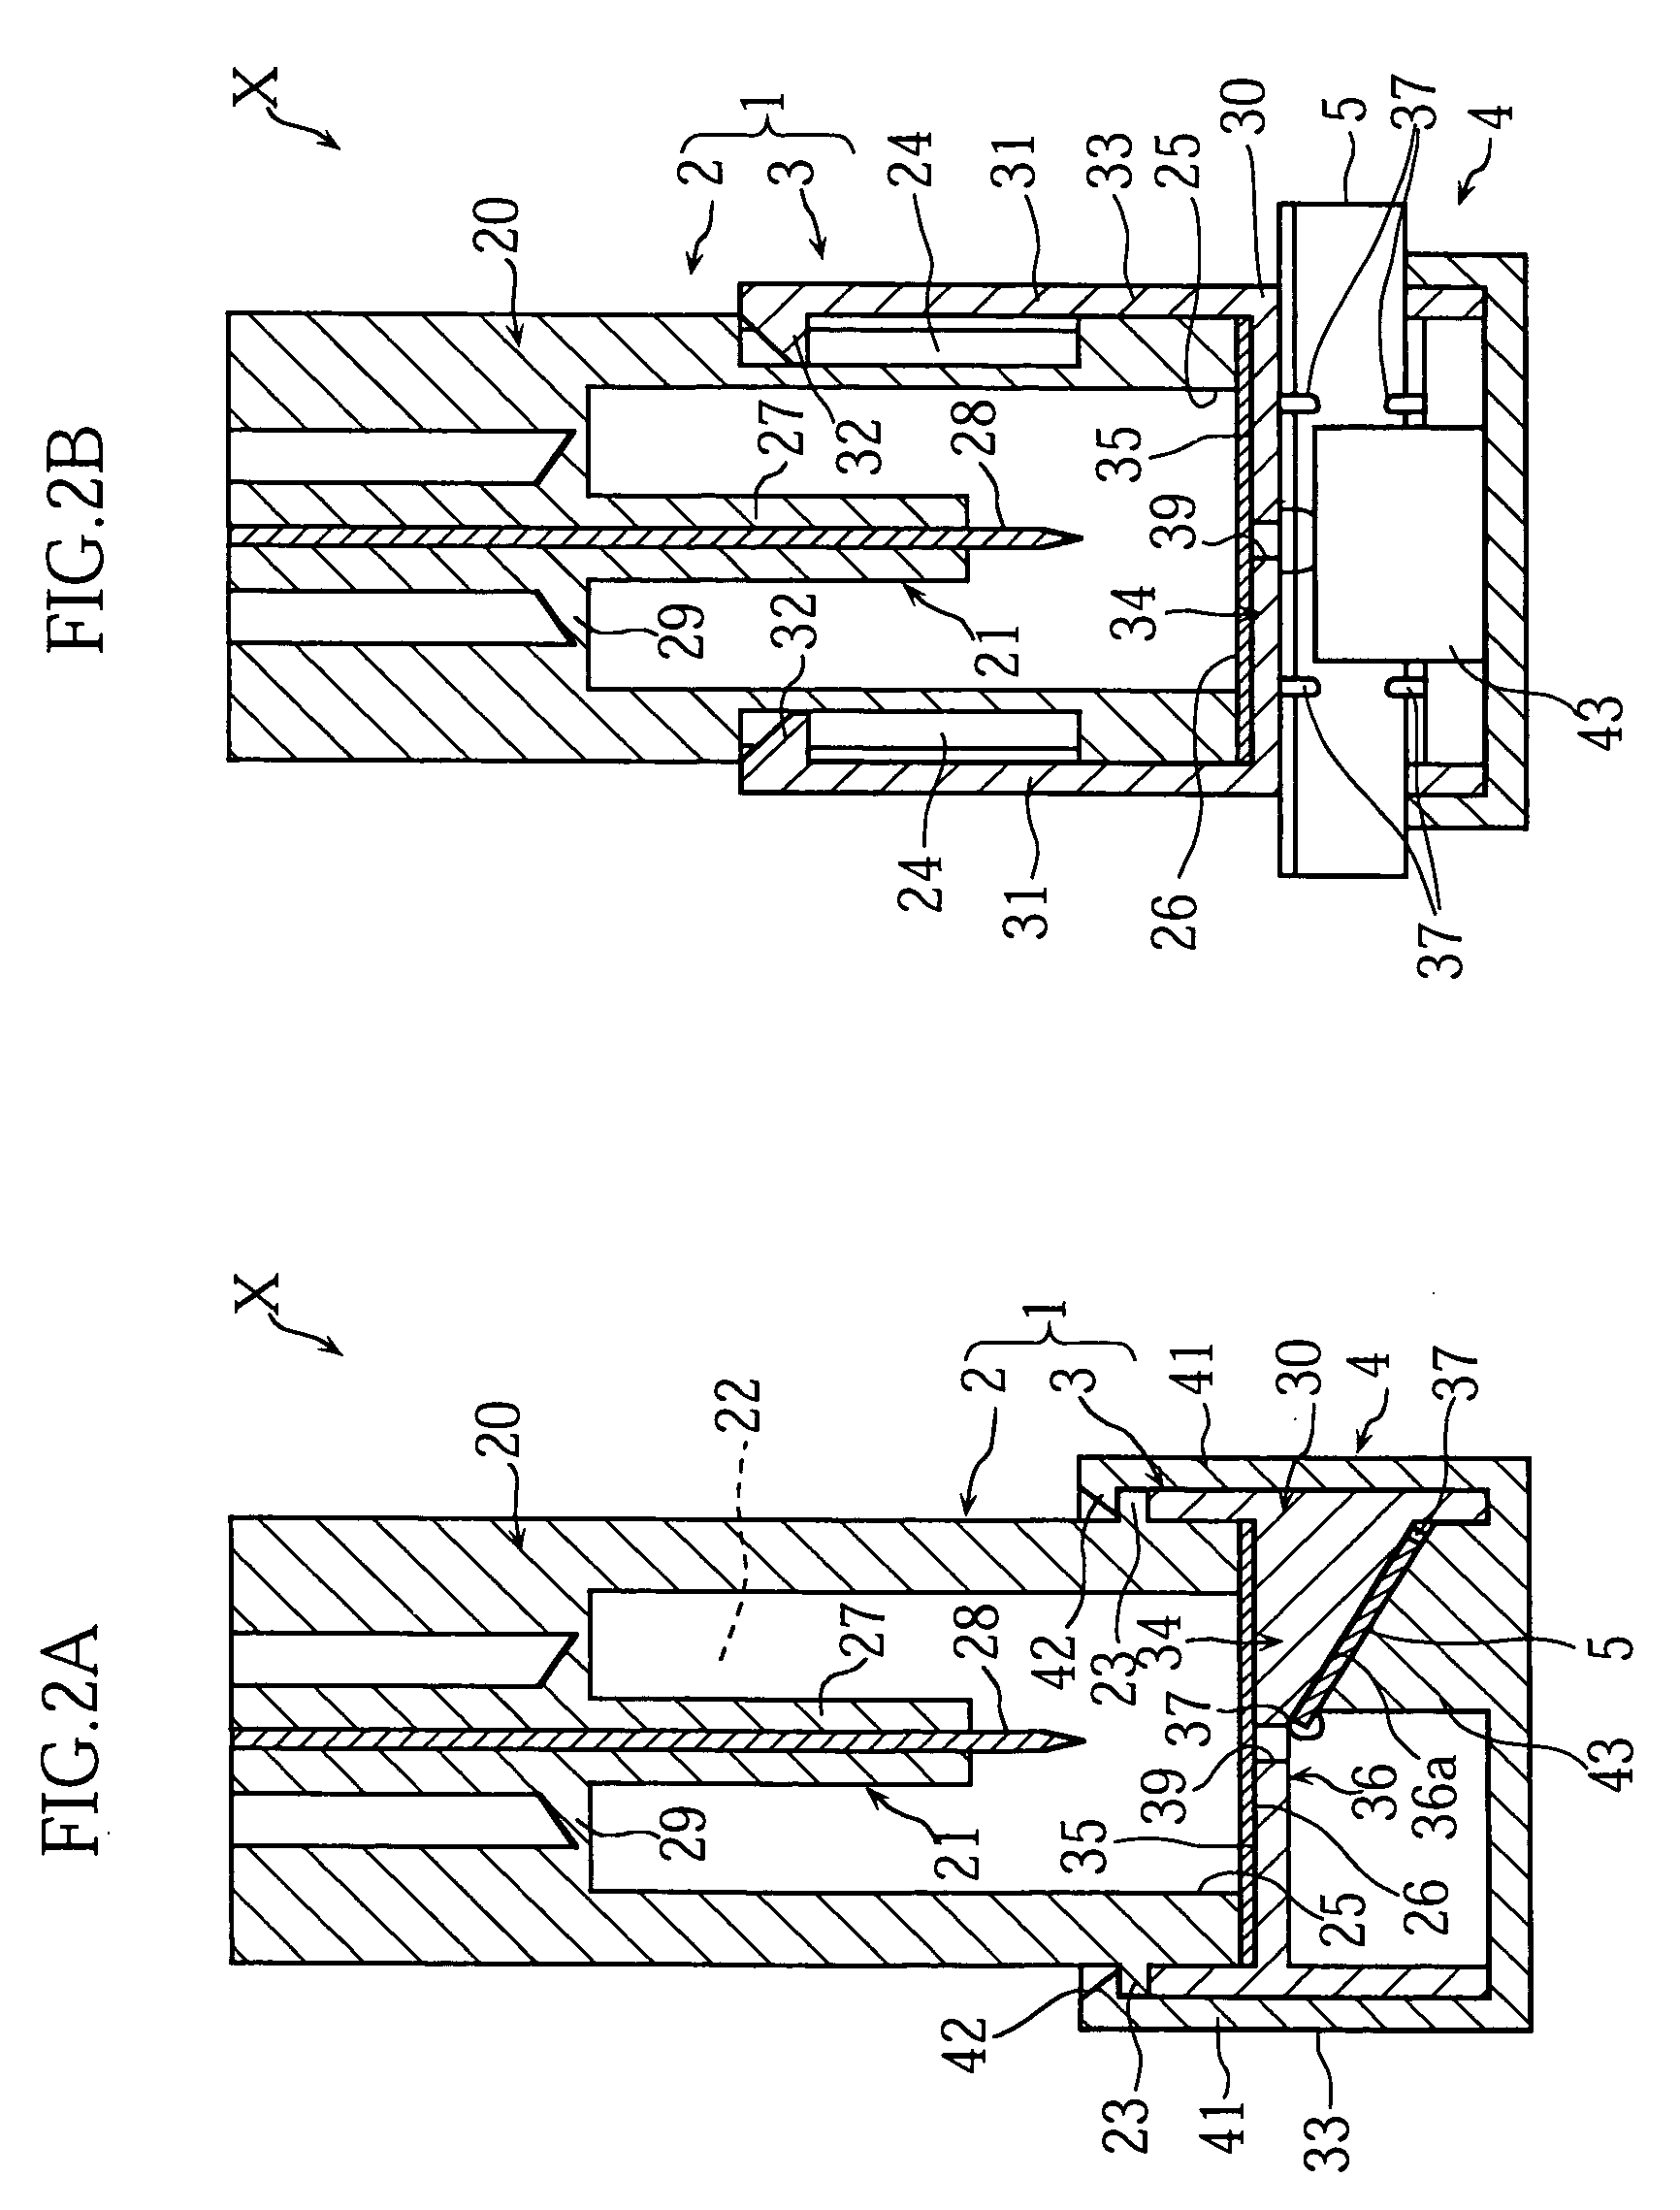 Attachment for body fluid sampling device and method of making the same